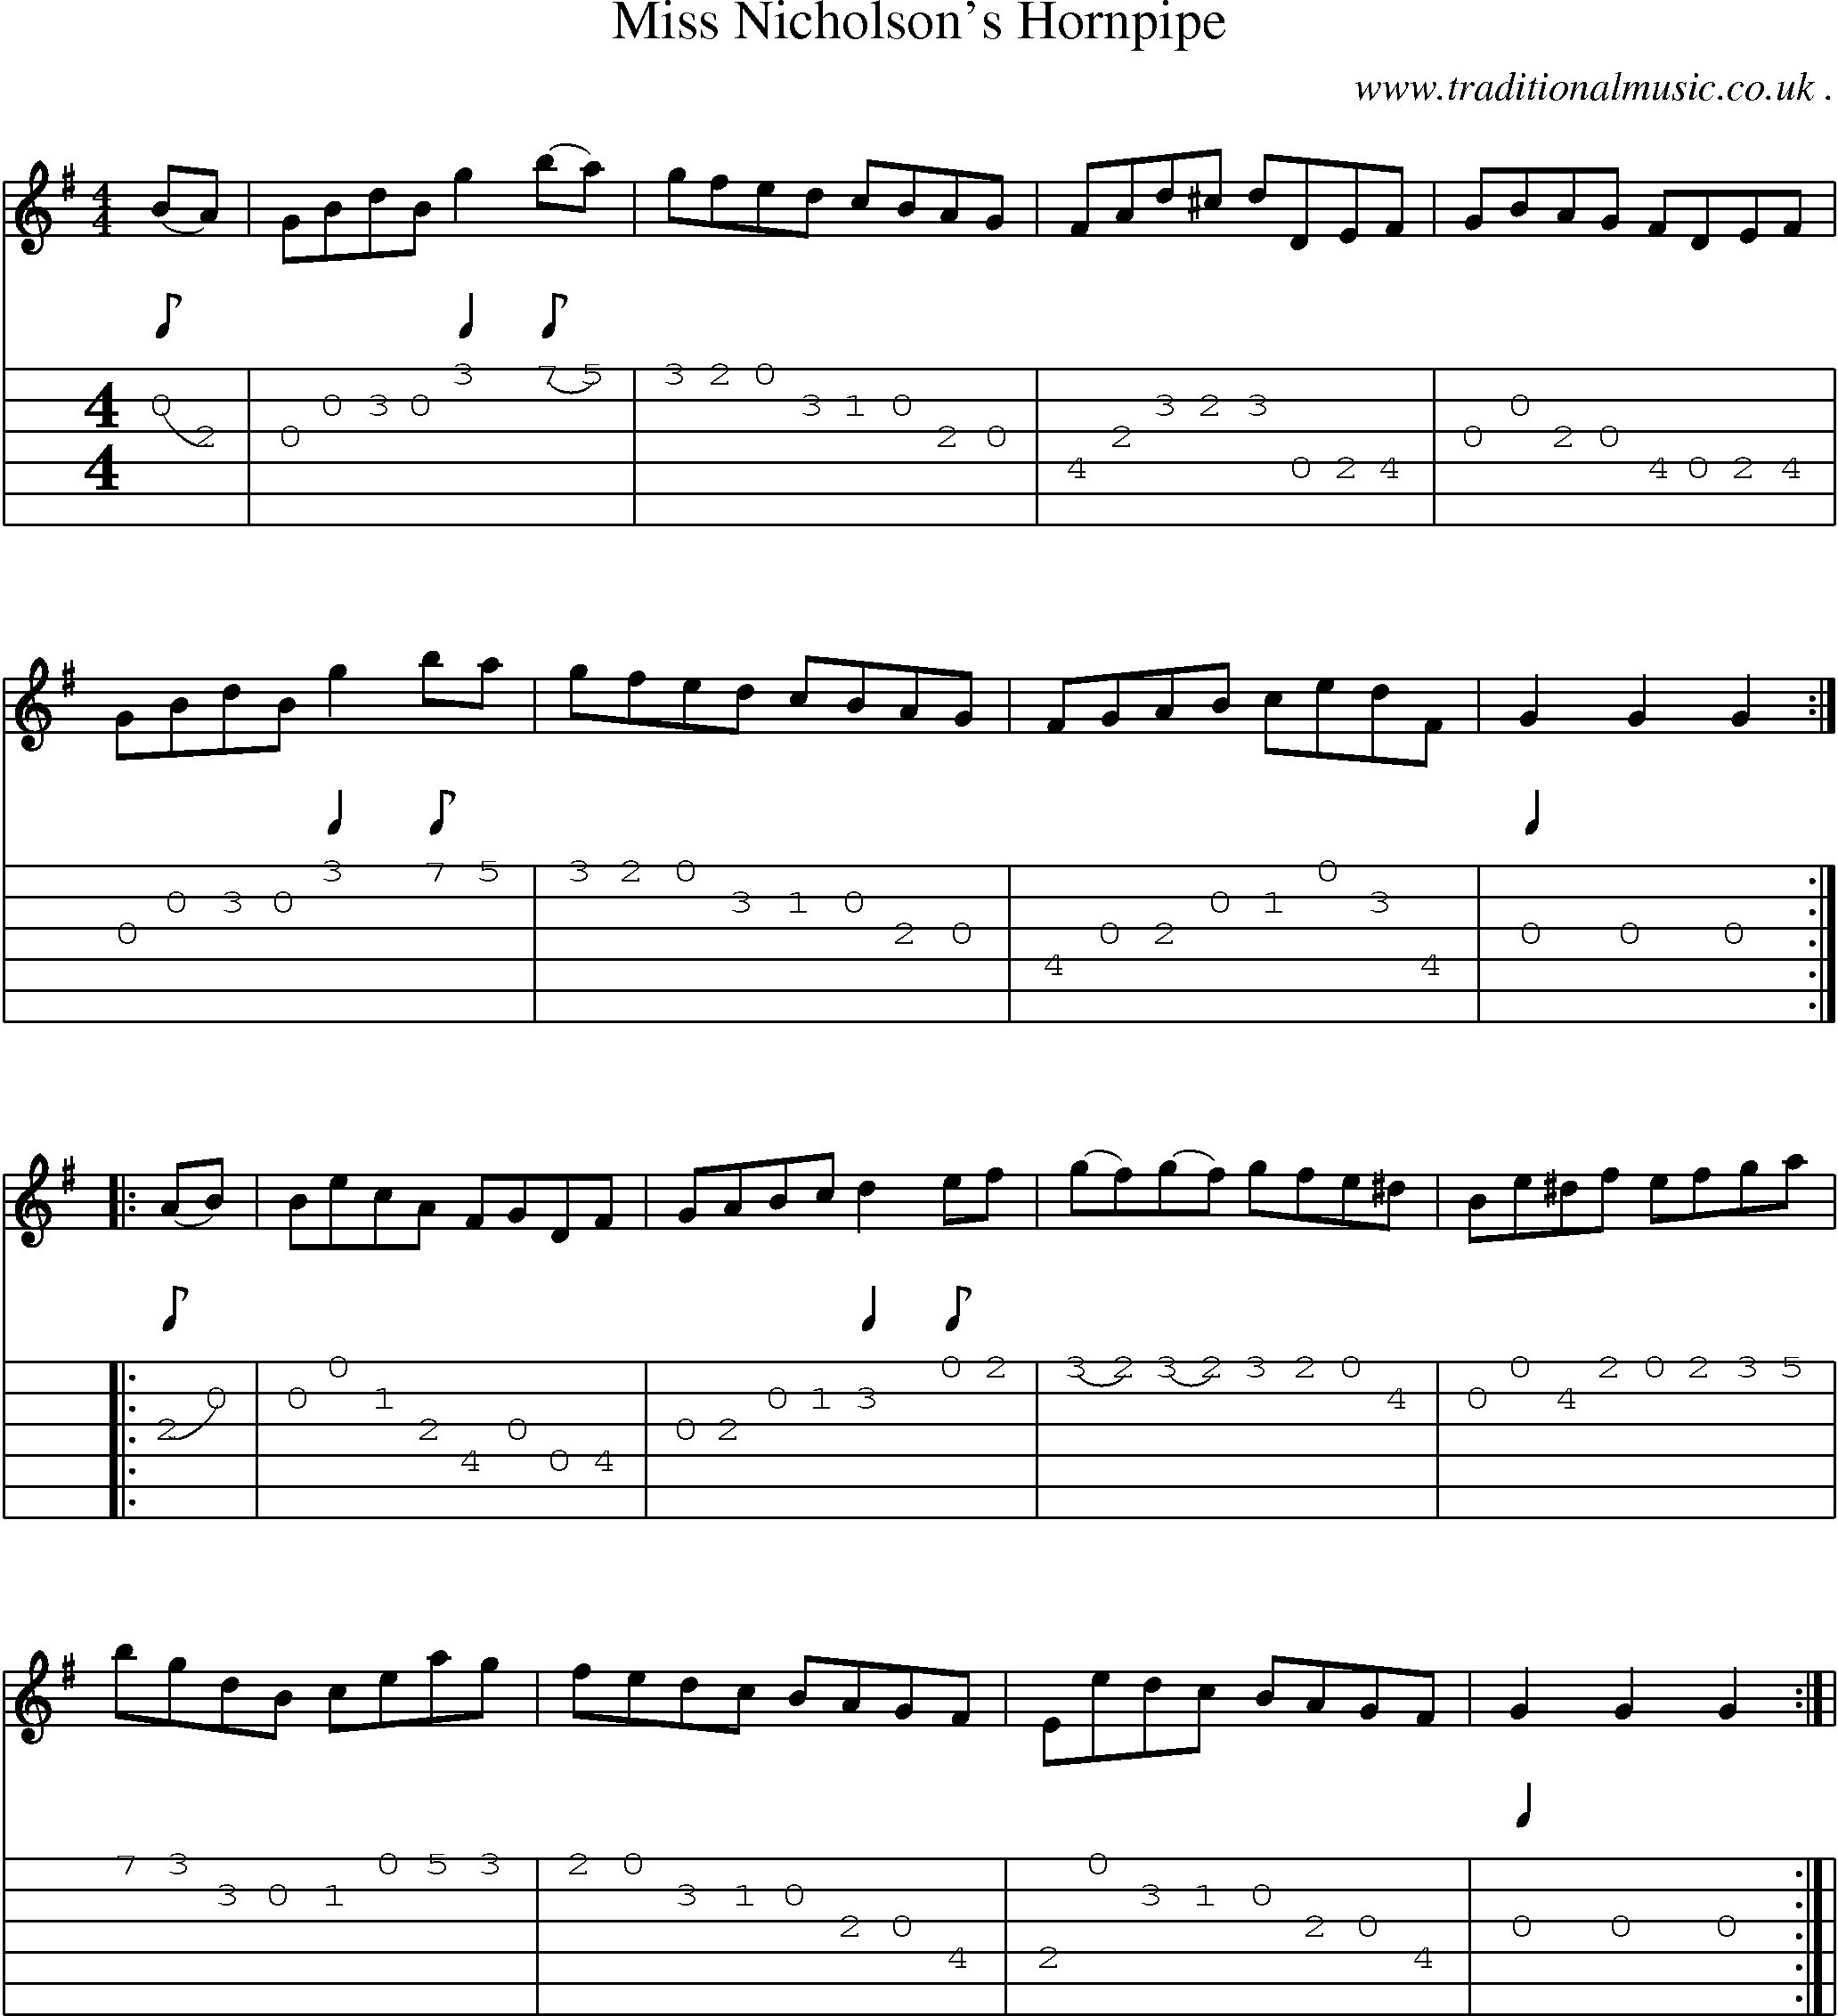 Sheet-Music and Guitar Tabs for Miss Nicholsons Hornpipe